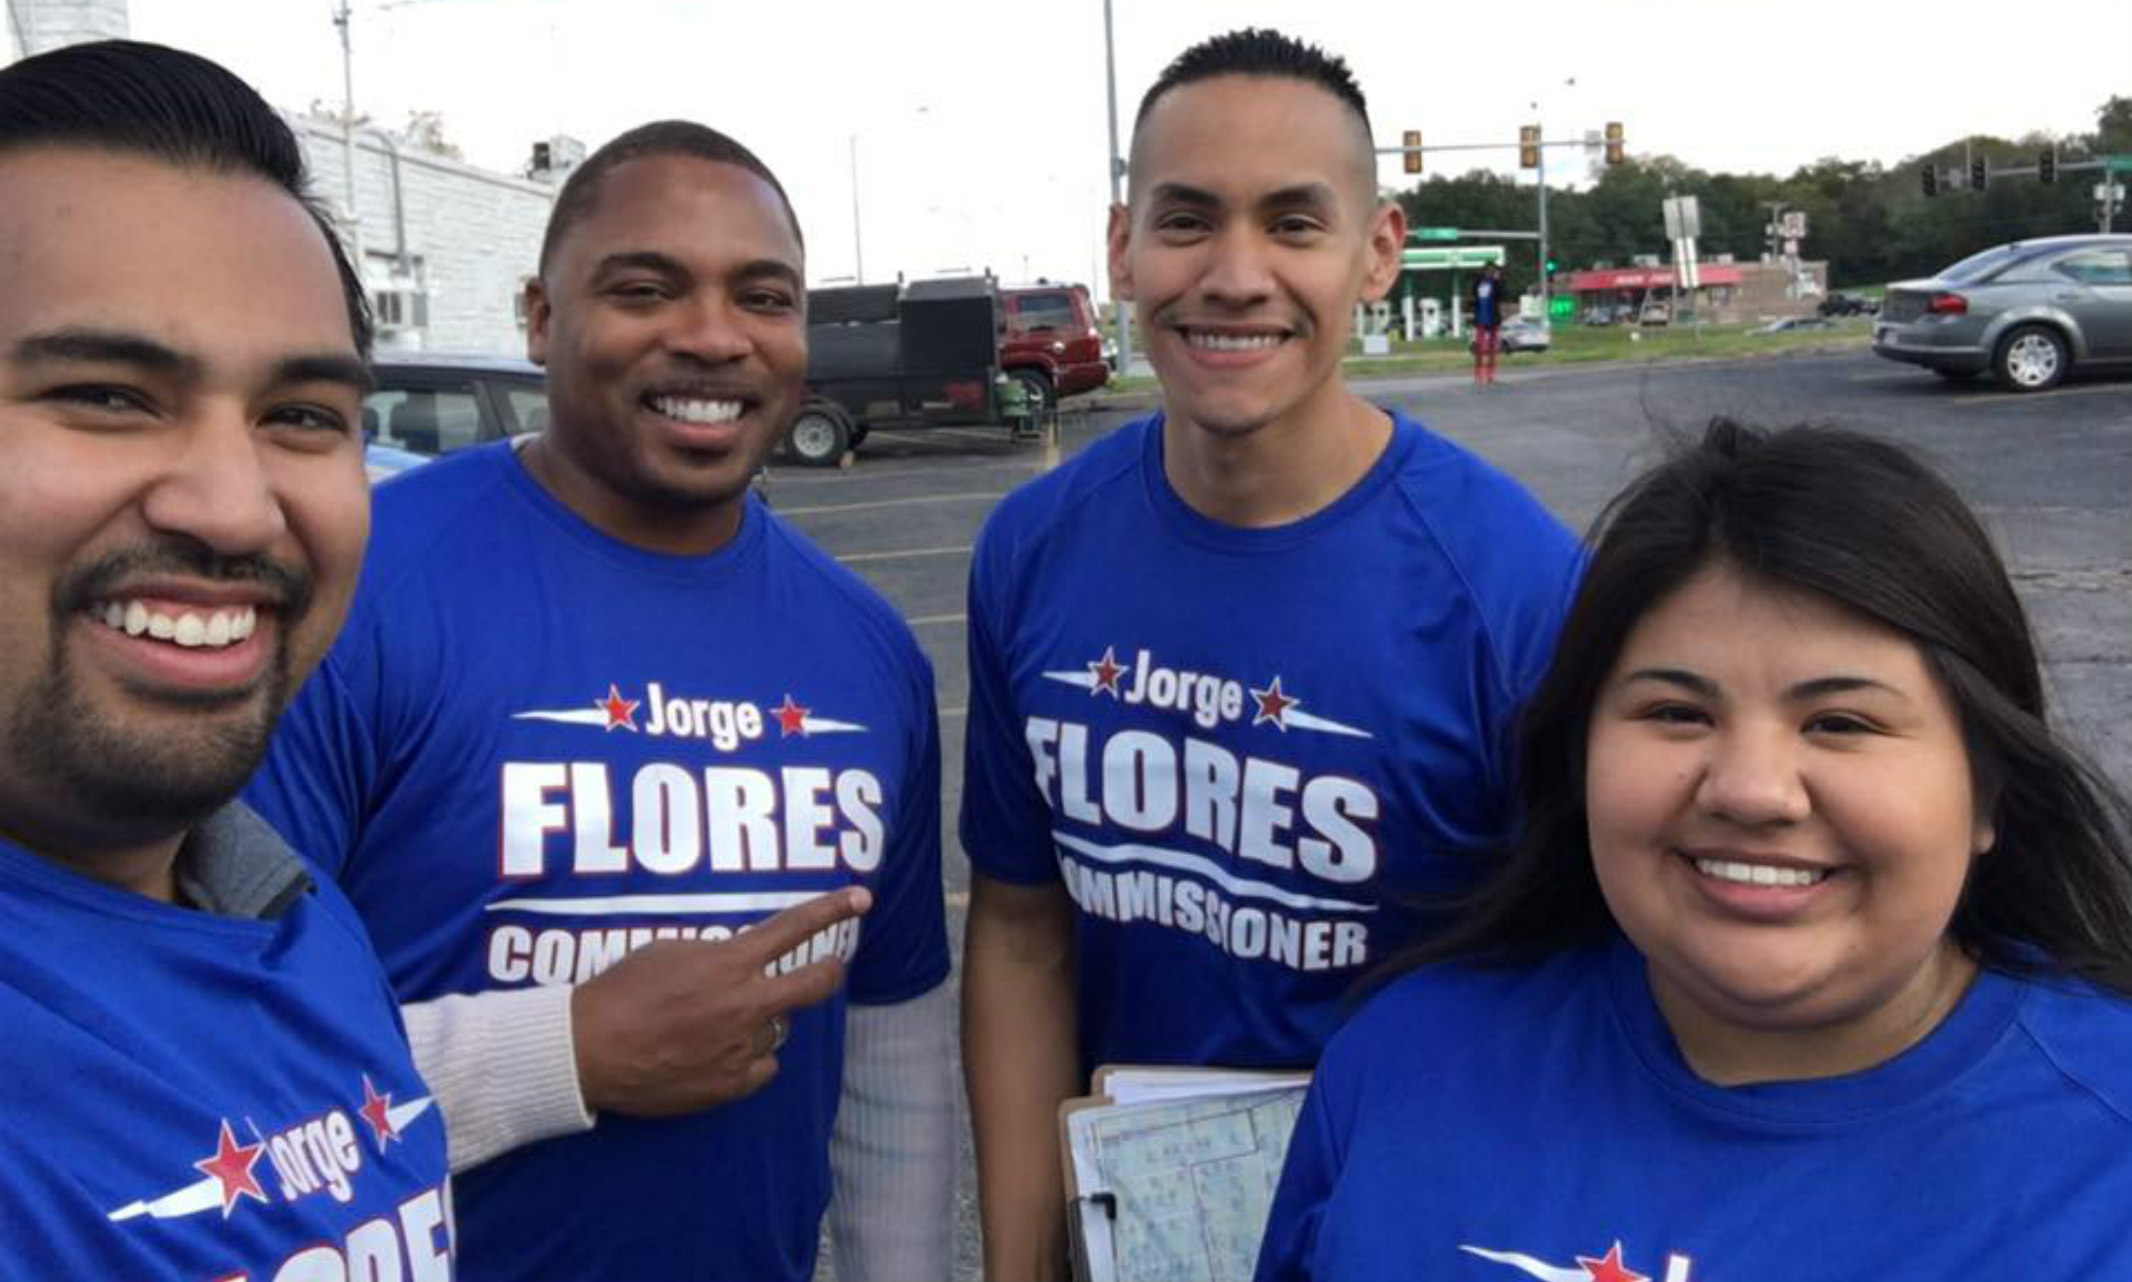 Aly Hernandez, far right, with a group of volunteers previously supporting Jorge Flores' campaign.